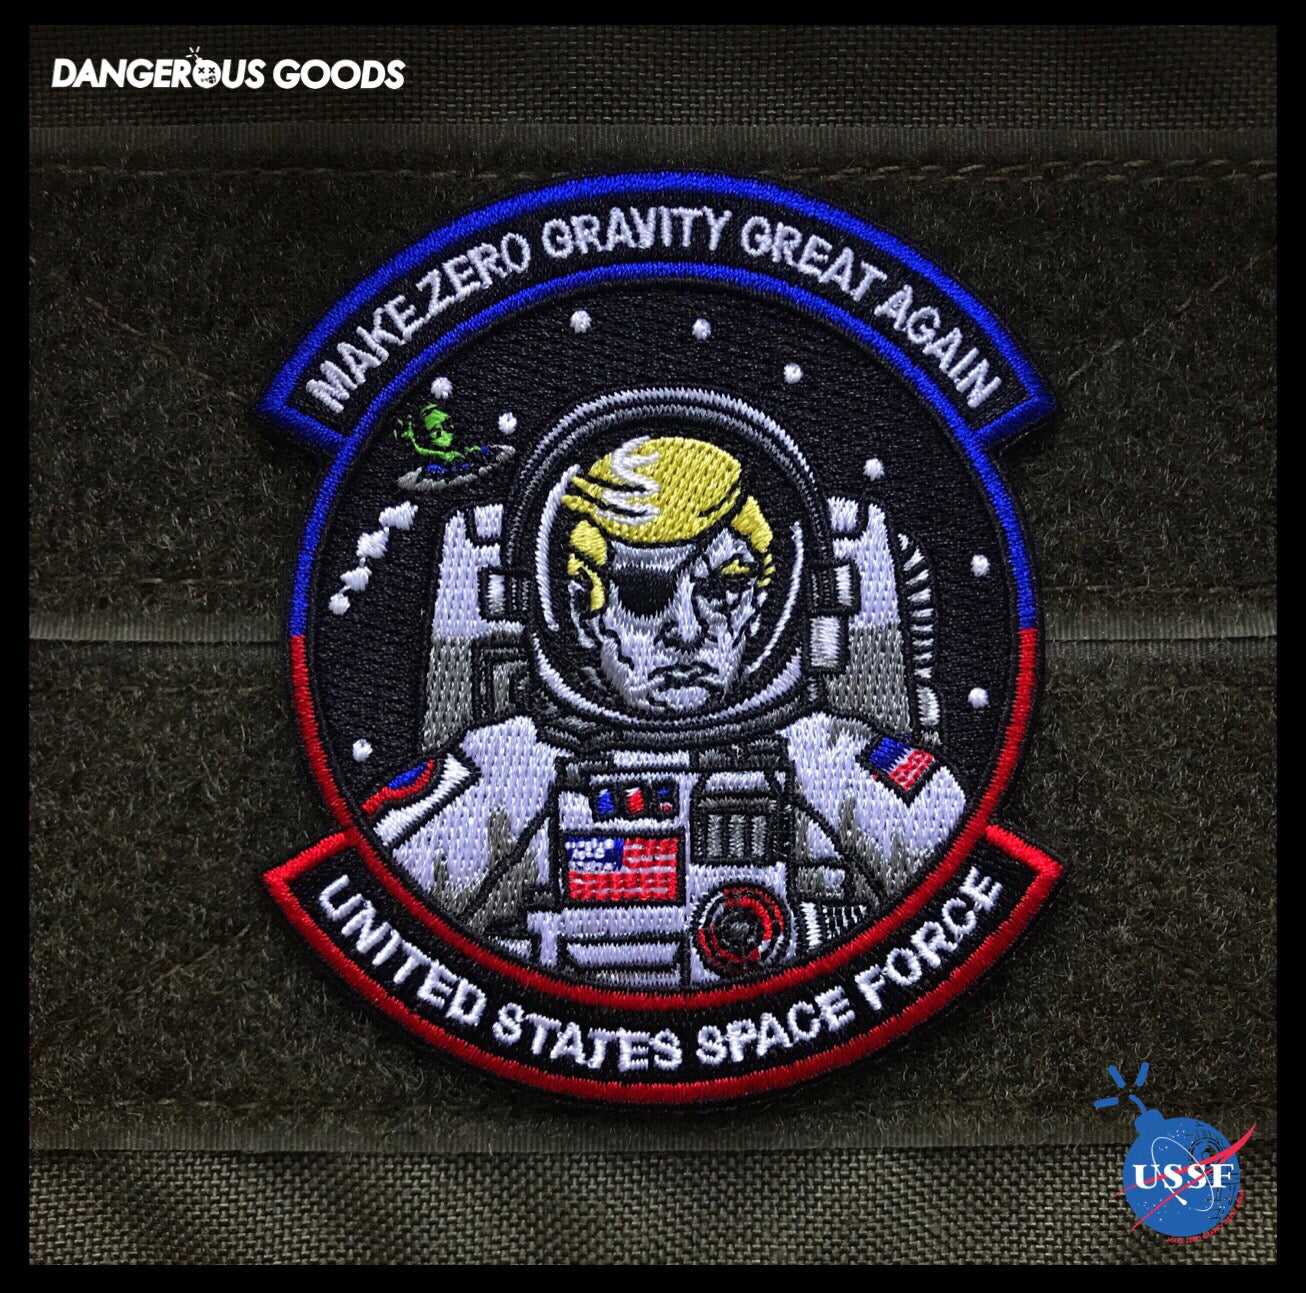 President Donald Trump USSF Space Force Morale Patch